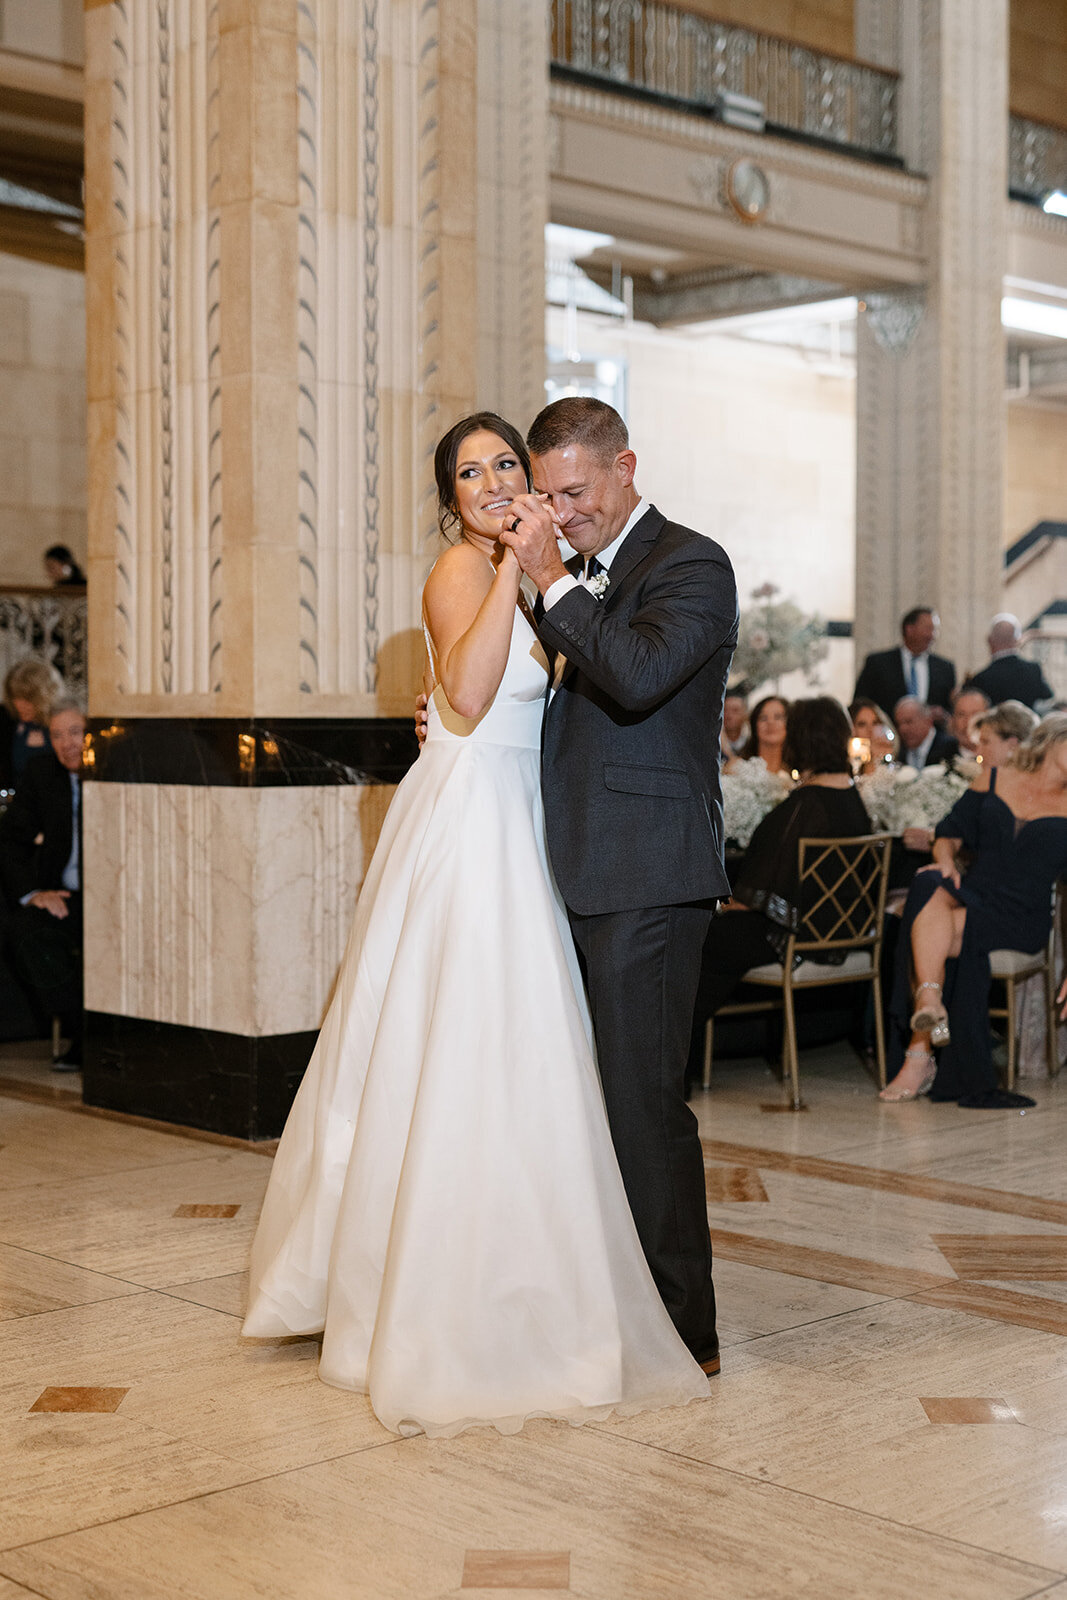 Kylie and Jack at The Grand Hall - Kansas City Wedding Photograpy - Nick and Lexie Photo Film-898